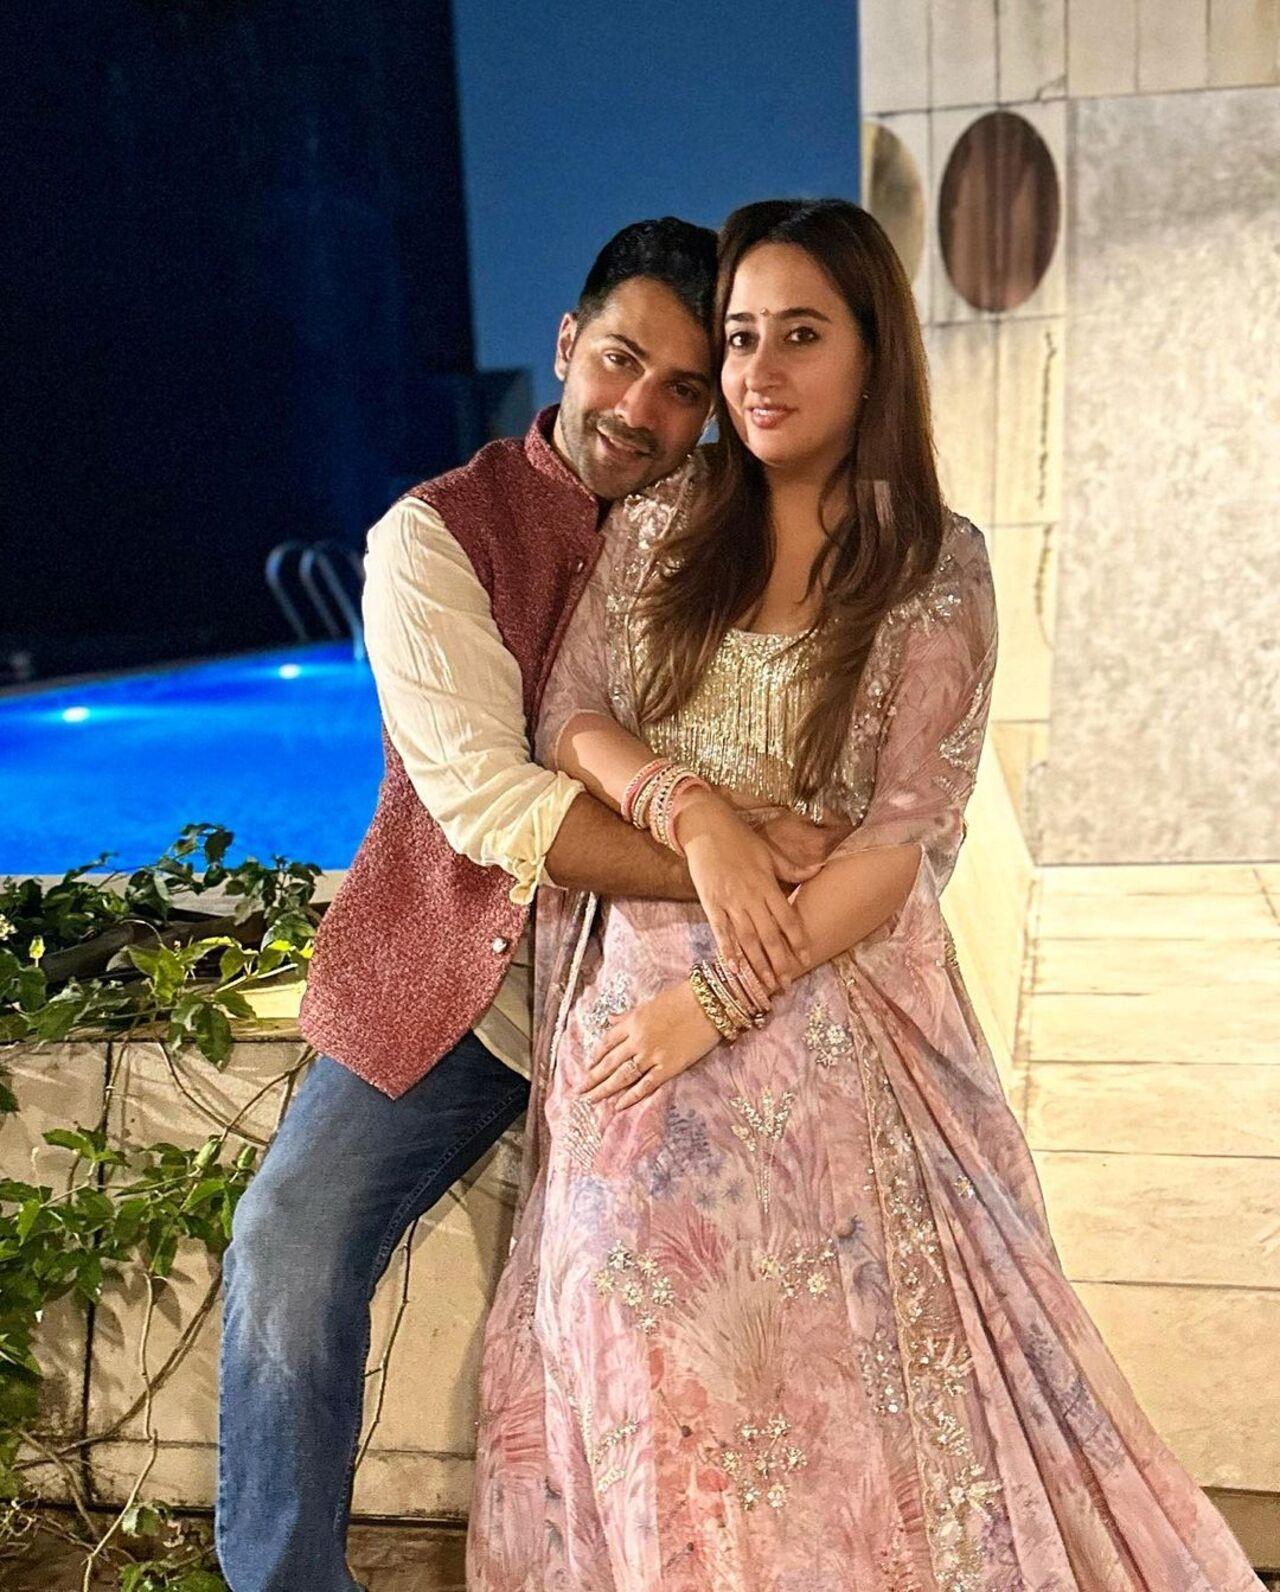 Varun Dhawan and Natasha Dalal pose together. The duo was also seen at Anil Kapoor's residence to celebrate the festival